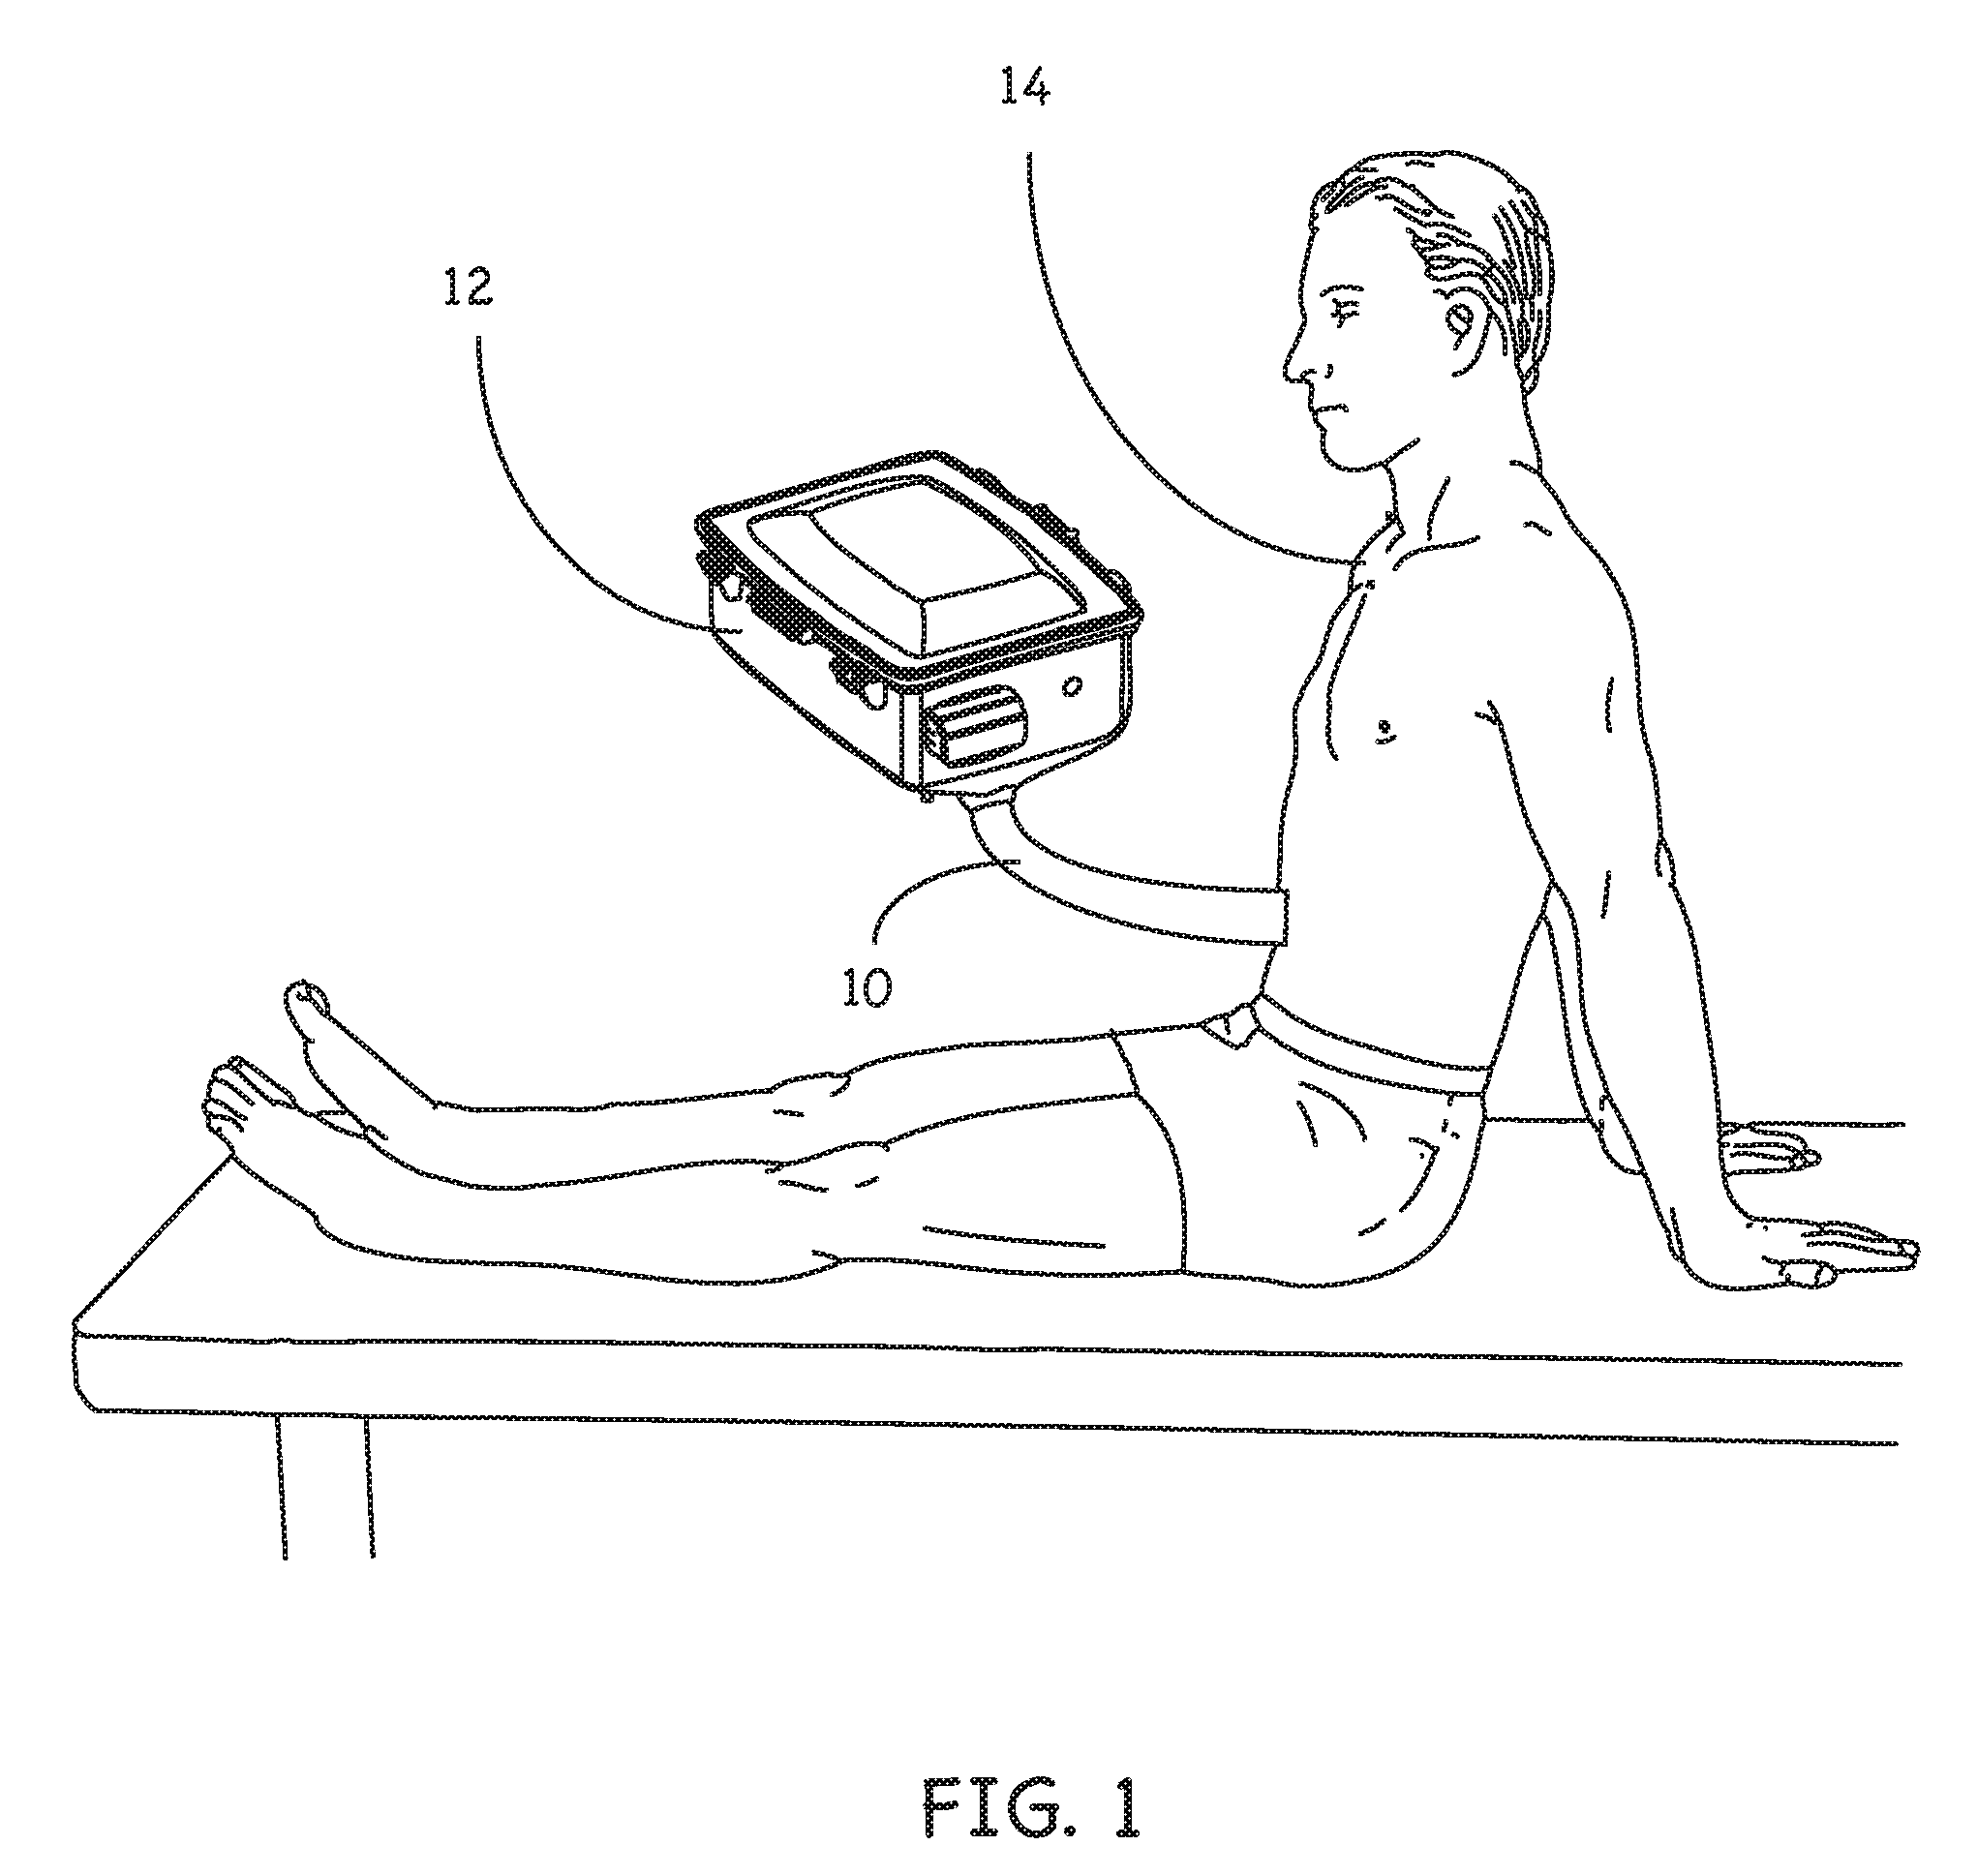 Method and Device for Perfusing Tissue by ExVivo Attachment to a Living Organism